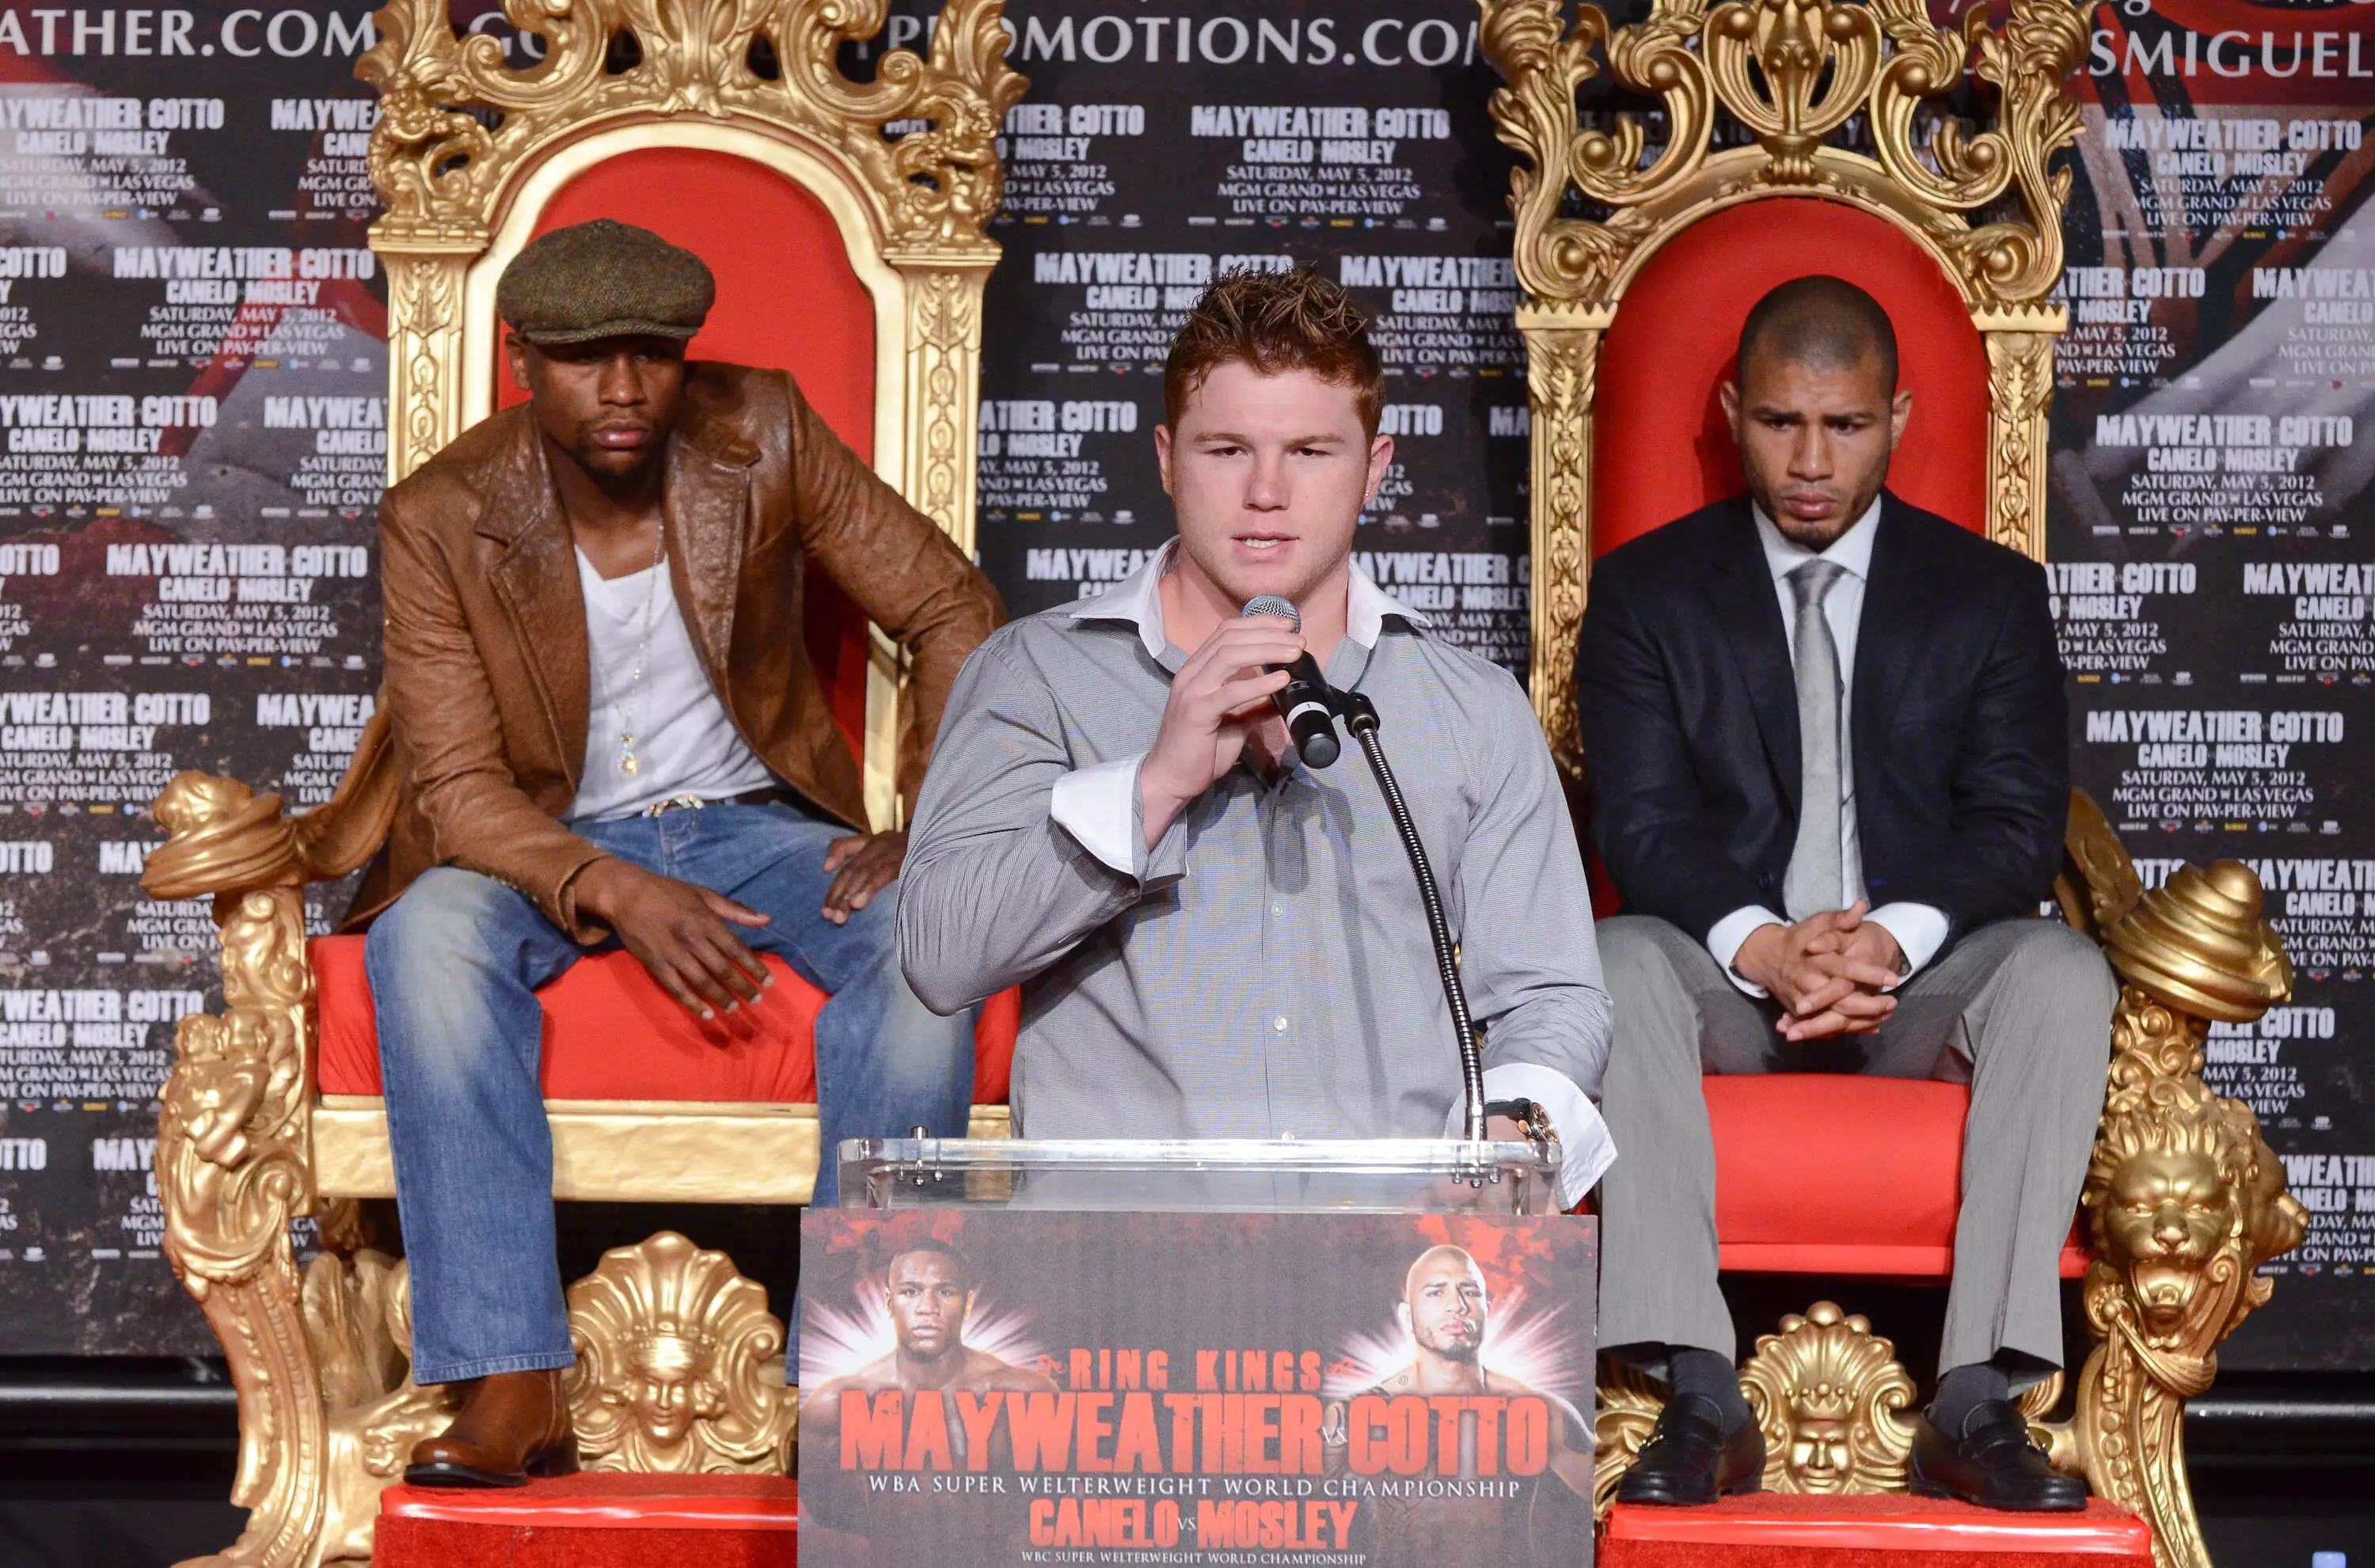 Mayweather, left, watches Canelo at a press conference in 2012 when they were on the same bill. Image: PA Images